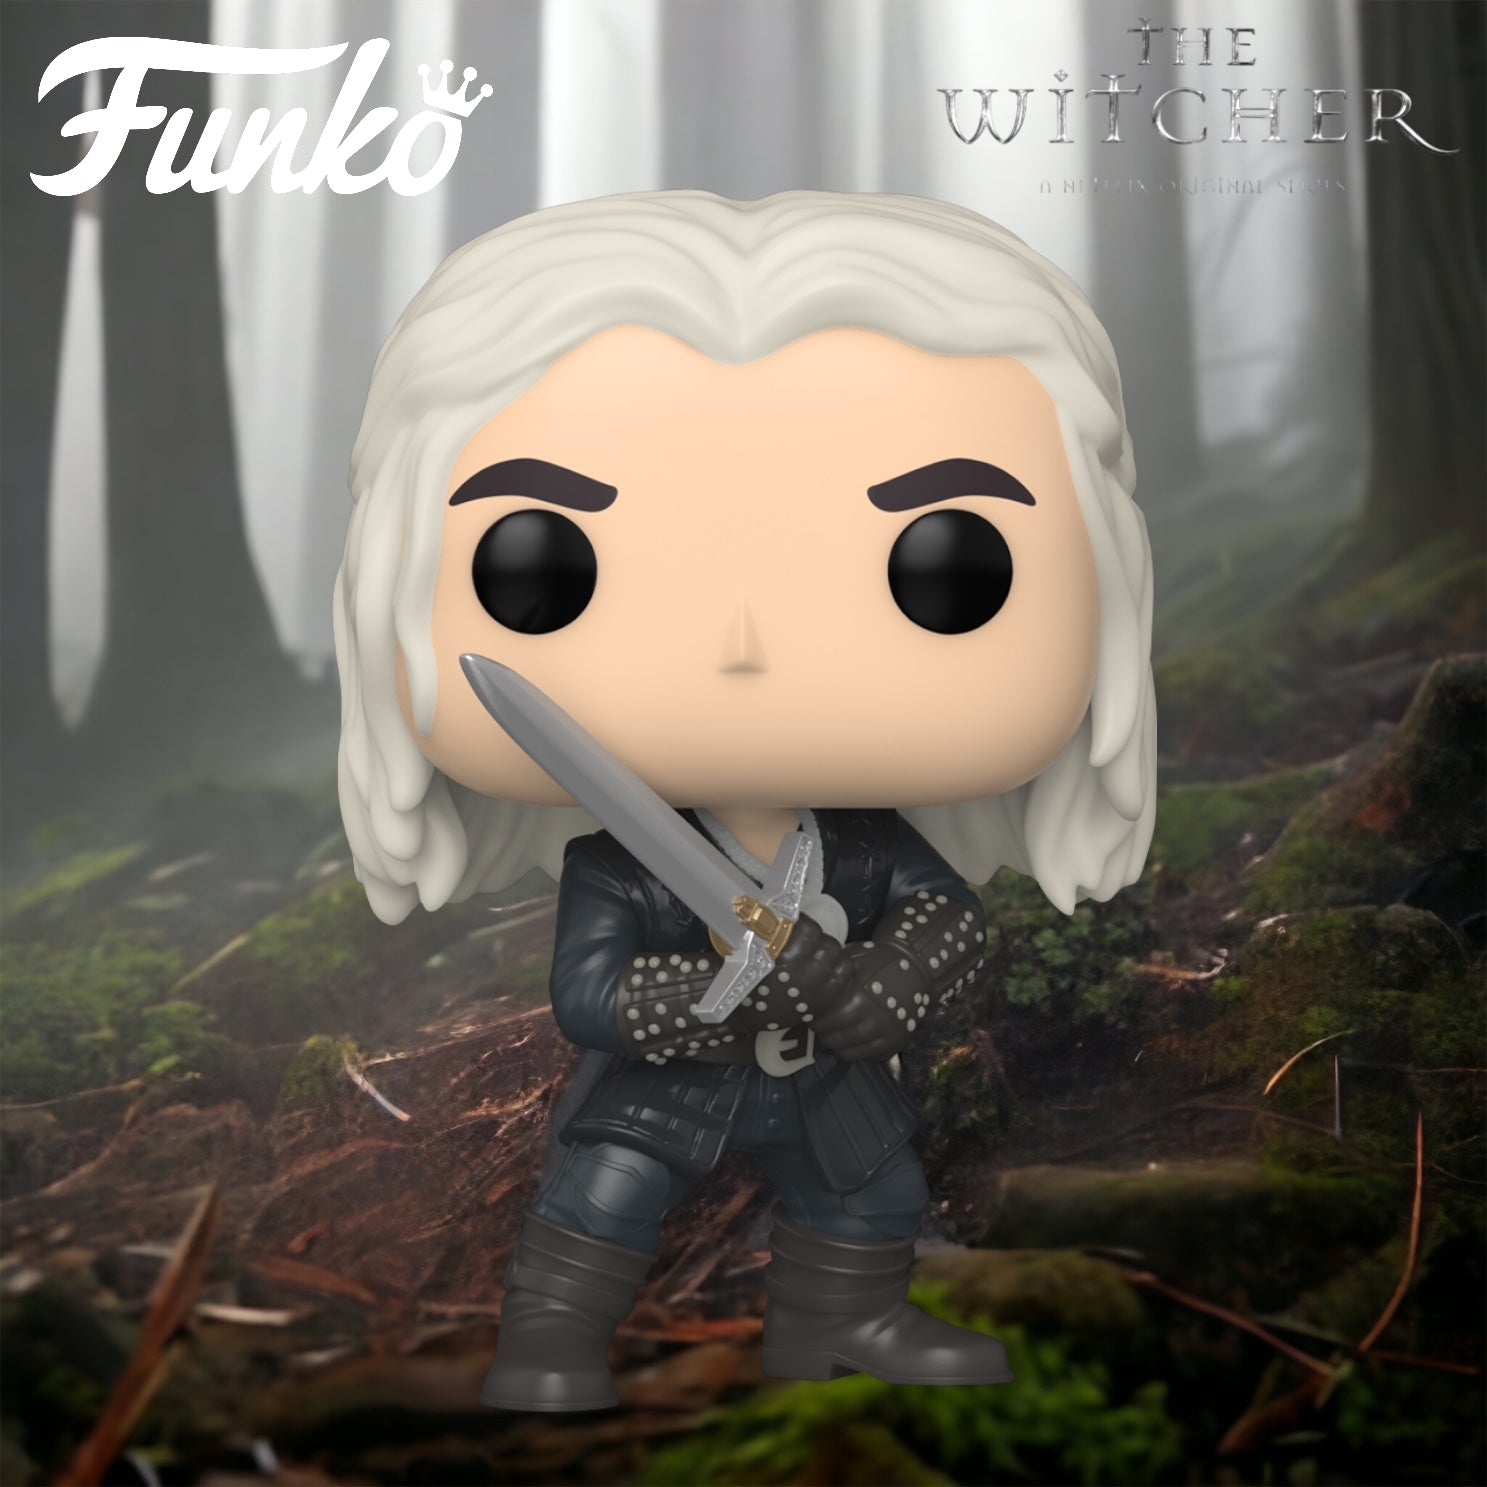 POP Figures on X: 📺 Fans of The Witcher? Have you seen past the